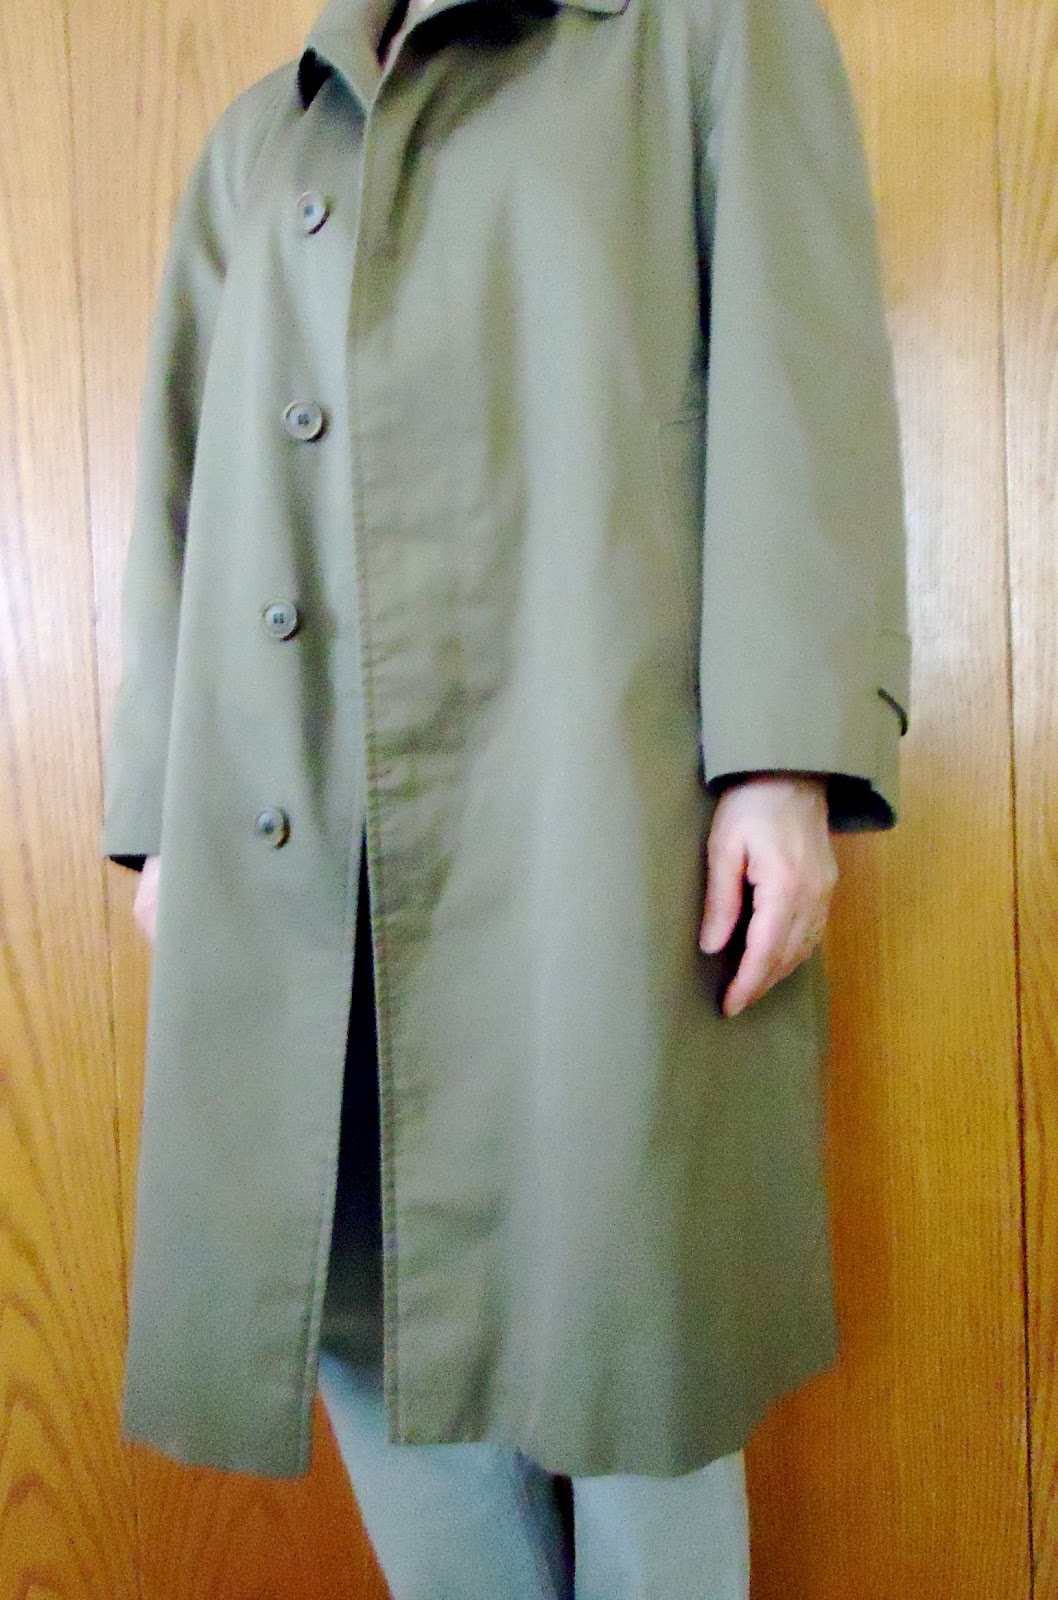 Closet Fashion Content Analysis: Spring Coats and Jackets